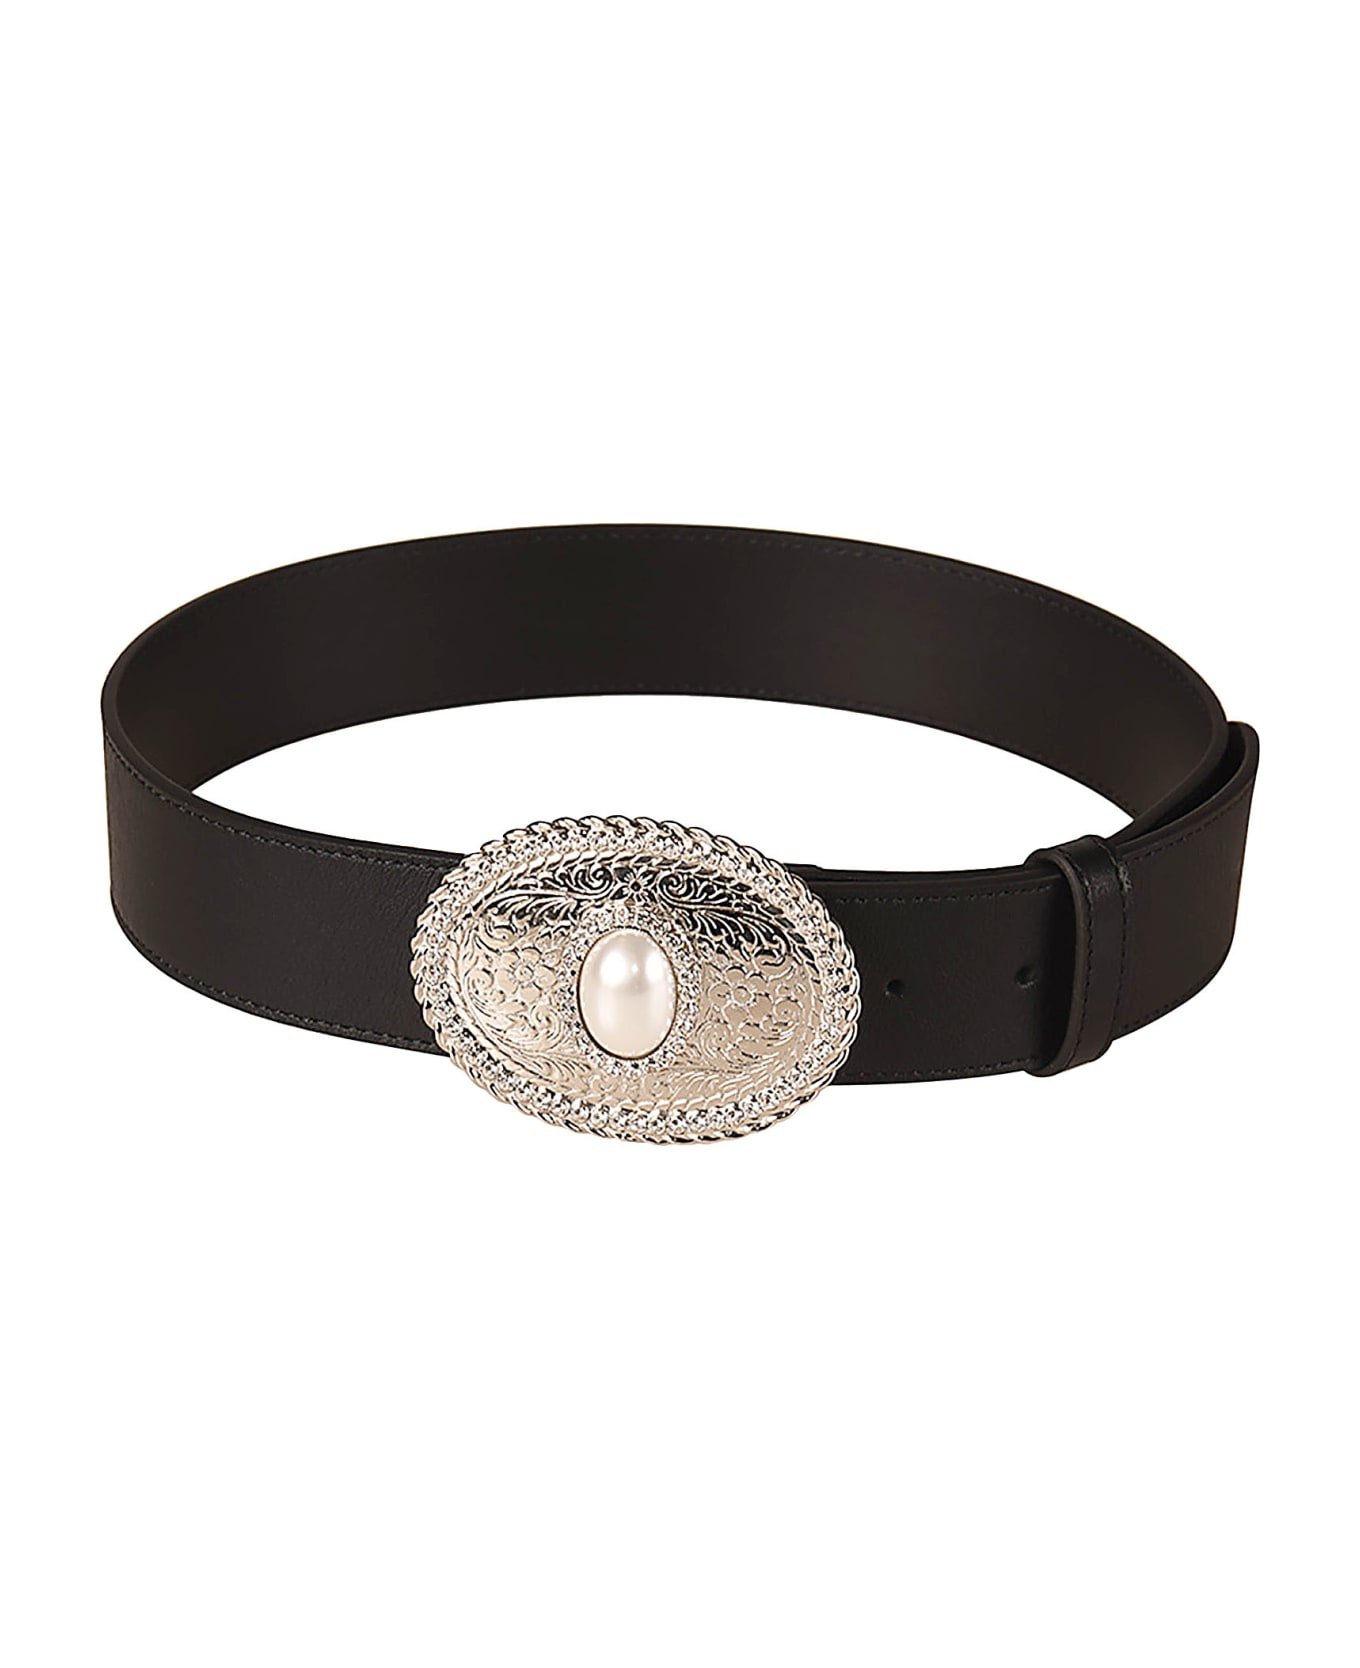 Alessandra Rich Oval Buckle Pearl Detail Leather Belt - Black/Silver ベルト